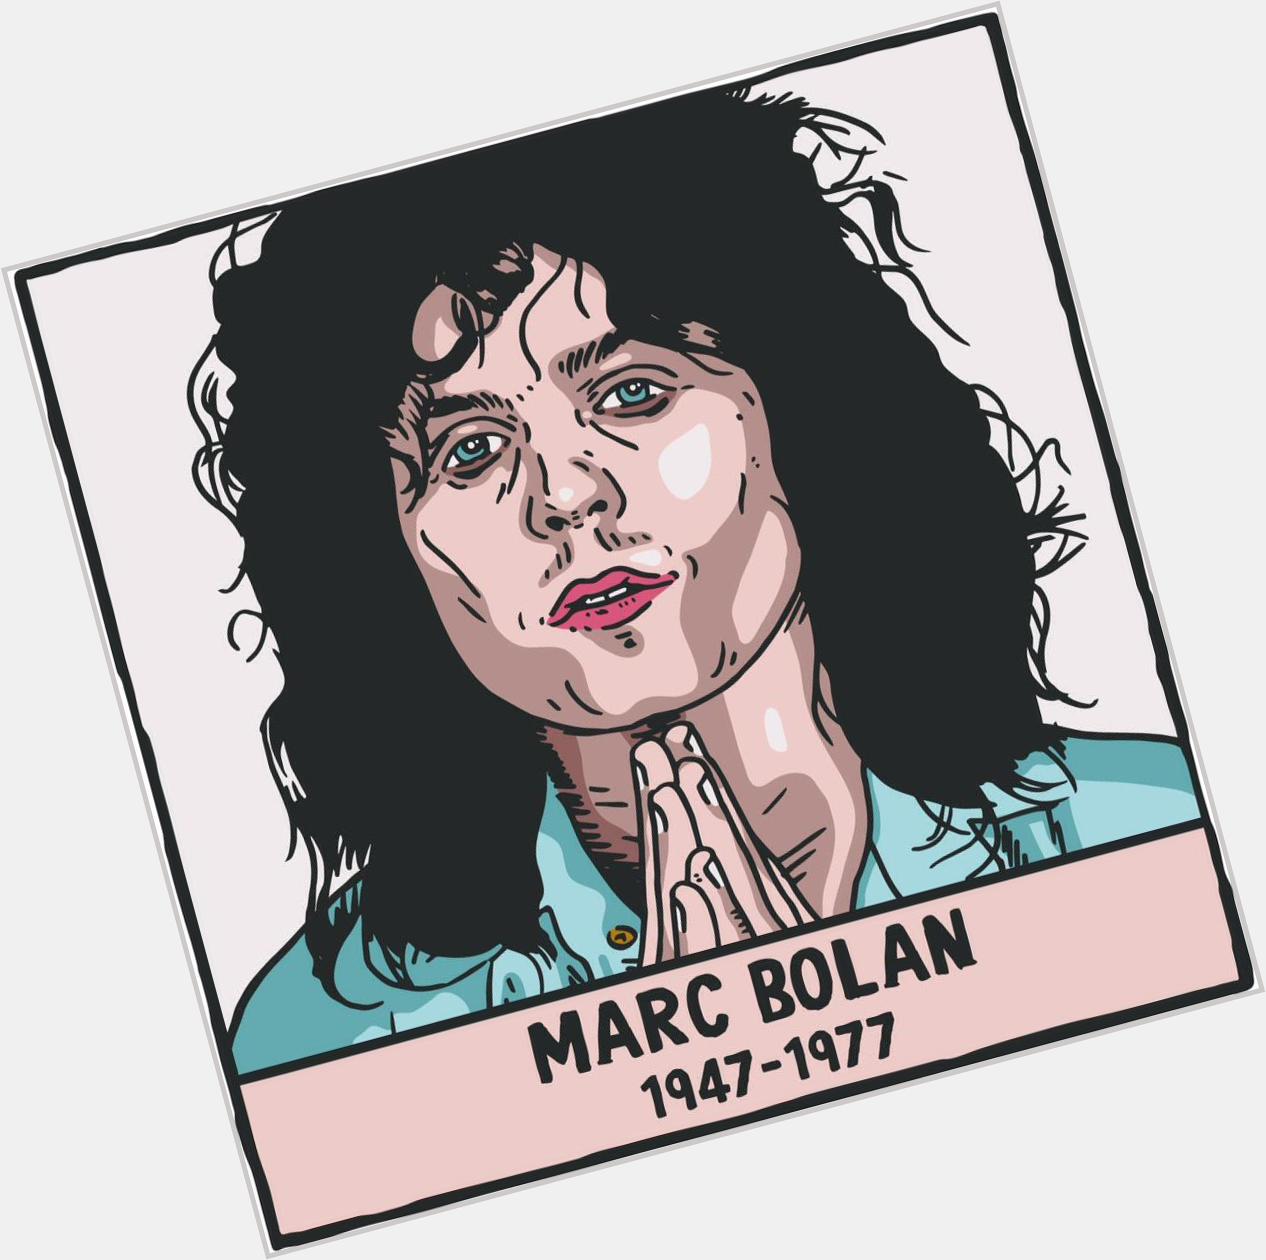 Happy 68th birthday Marc Bolan (1947-1977) Rest in peace   